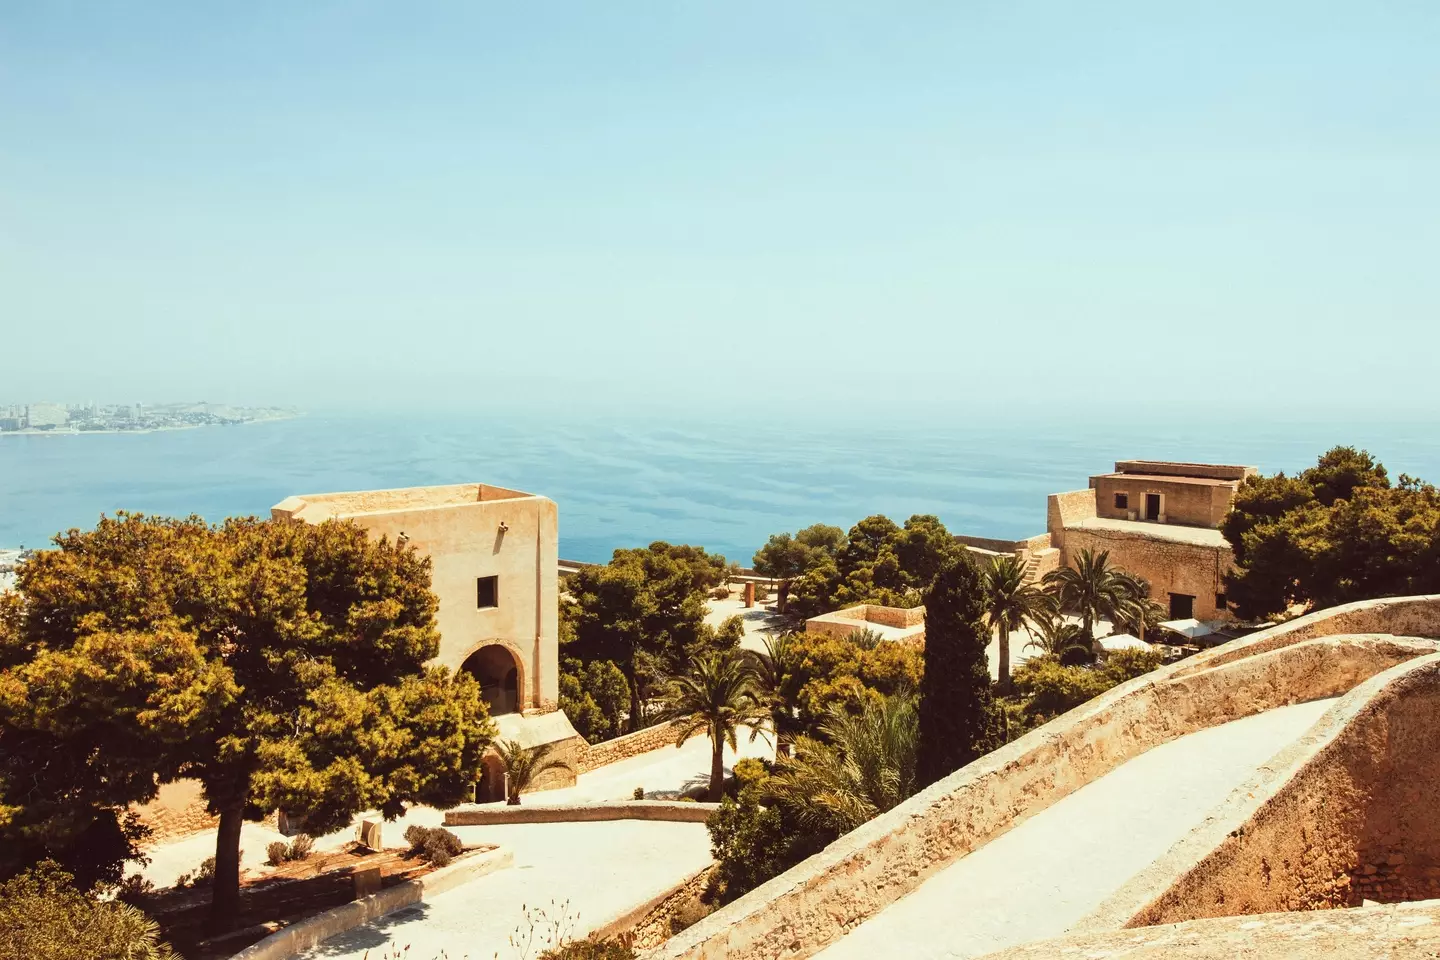 Malaga has been named the 'Miami of Europe'. (Elvis Bekmanis on Unsplash)